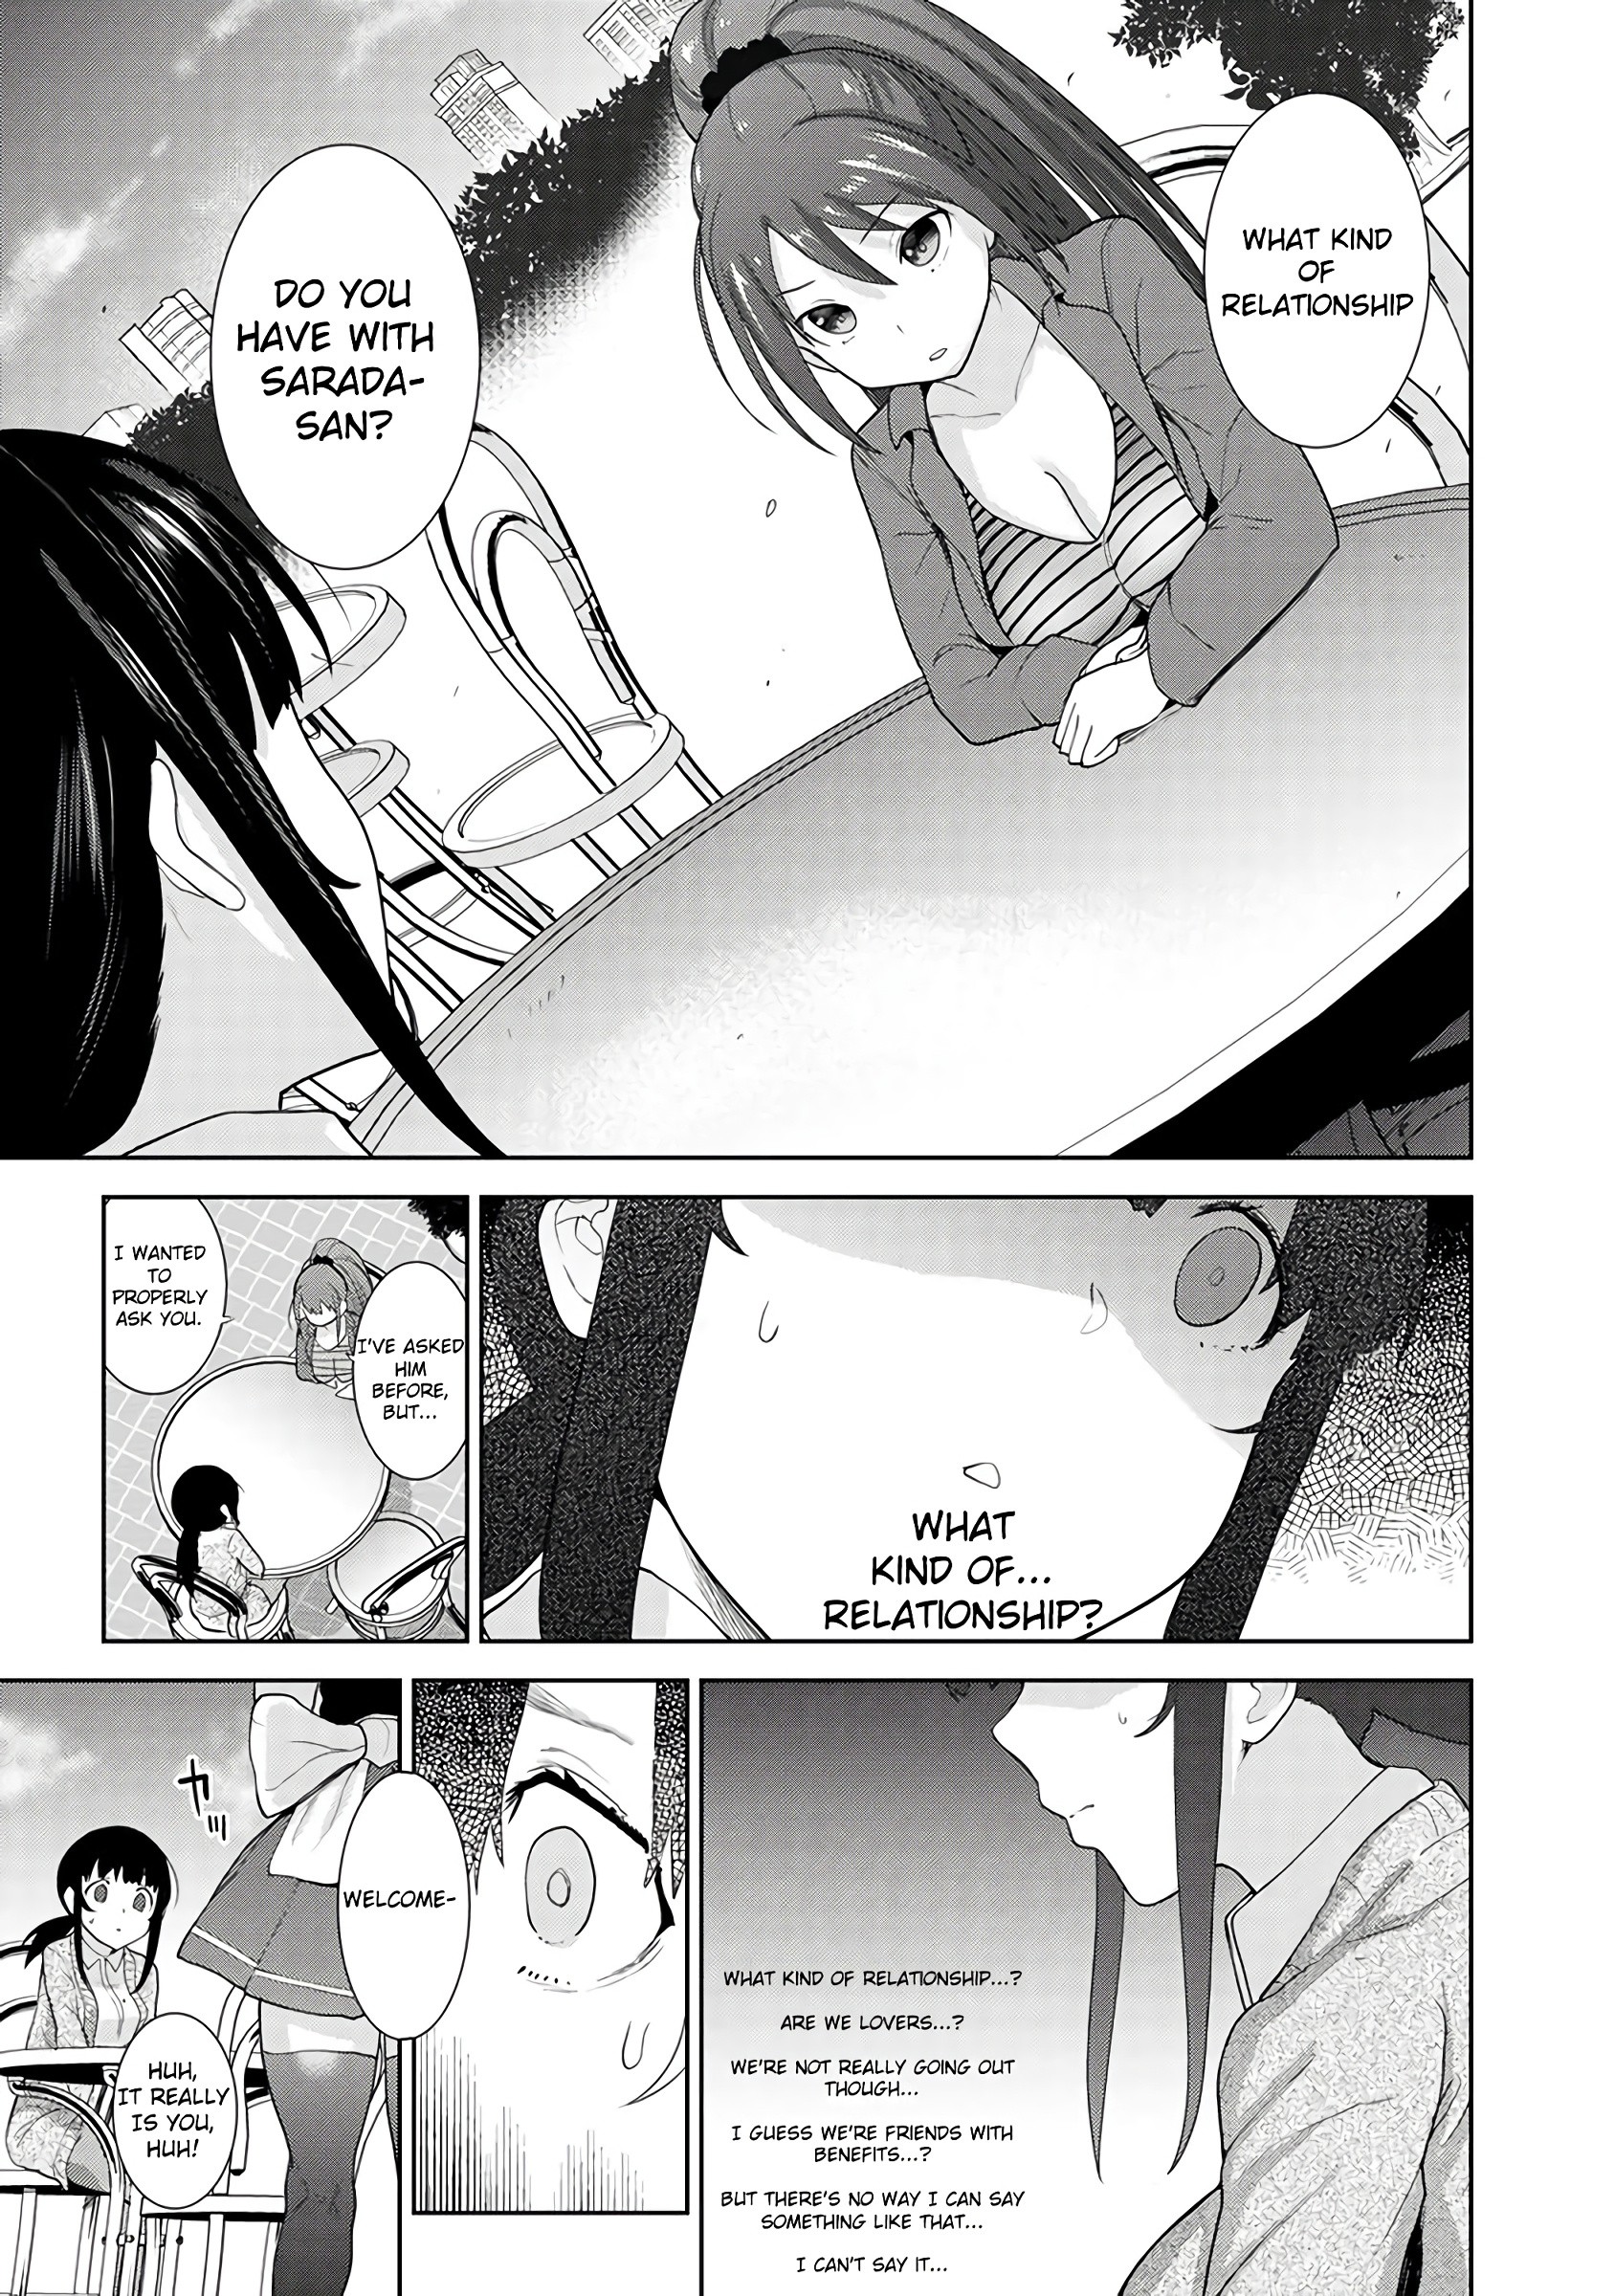 Method to Catch a Pretty Girl 9 hentai manga picture 11